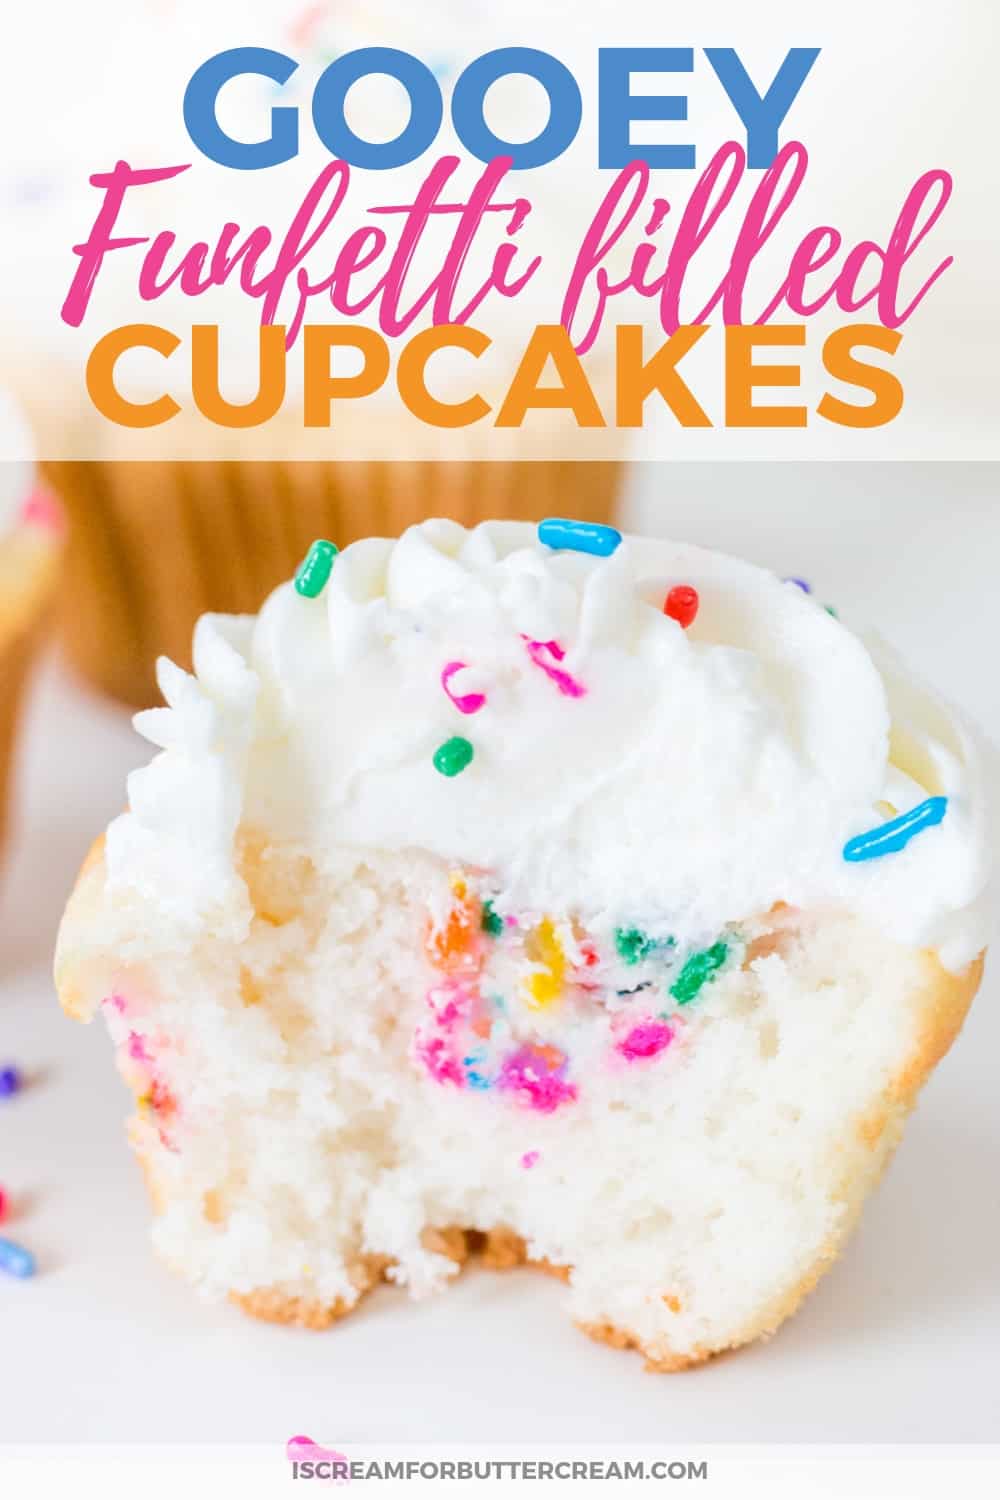 Gooey Funfetti Filled Cupcakes New Pinterest Graphic 1